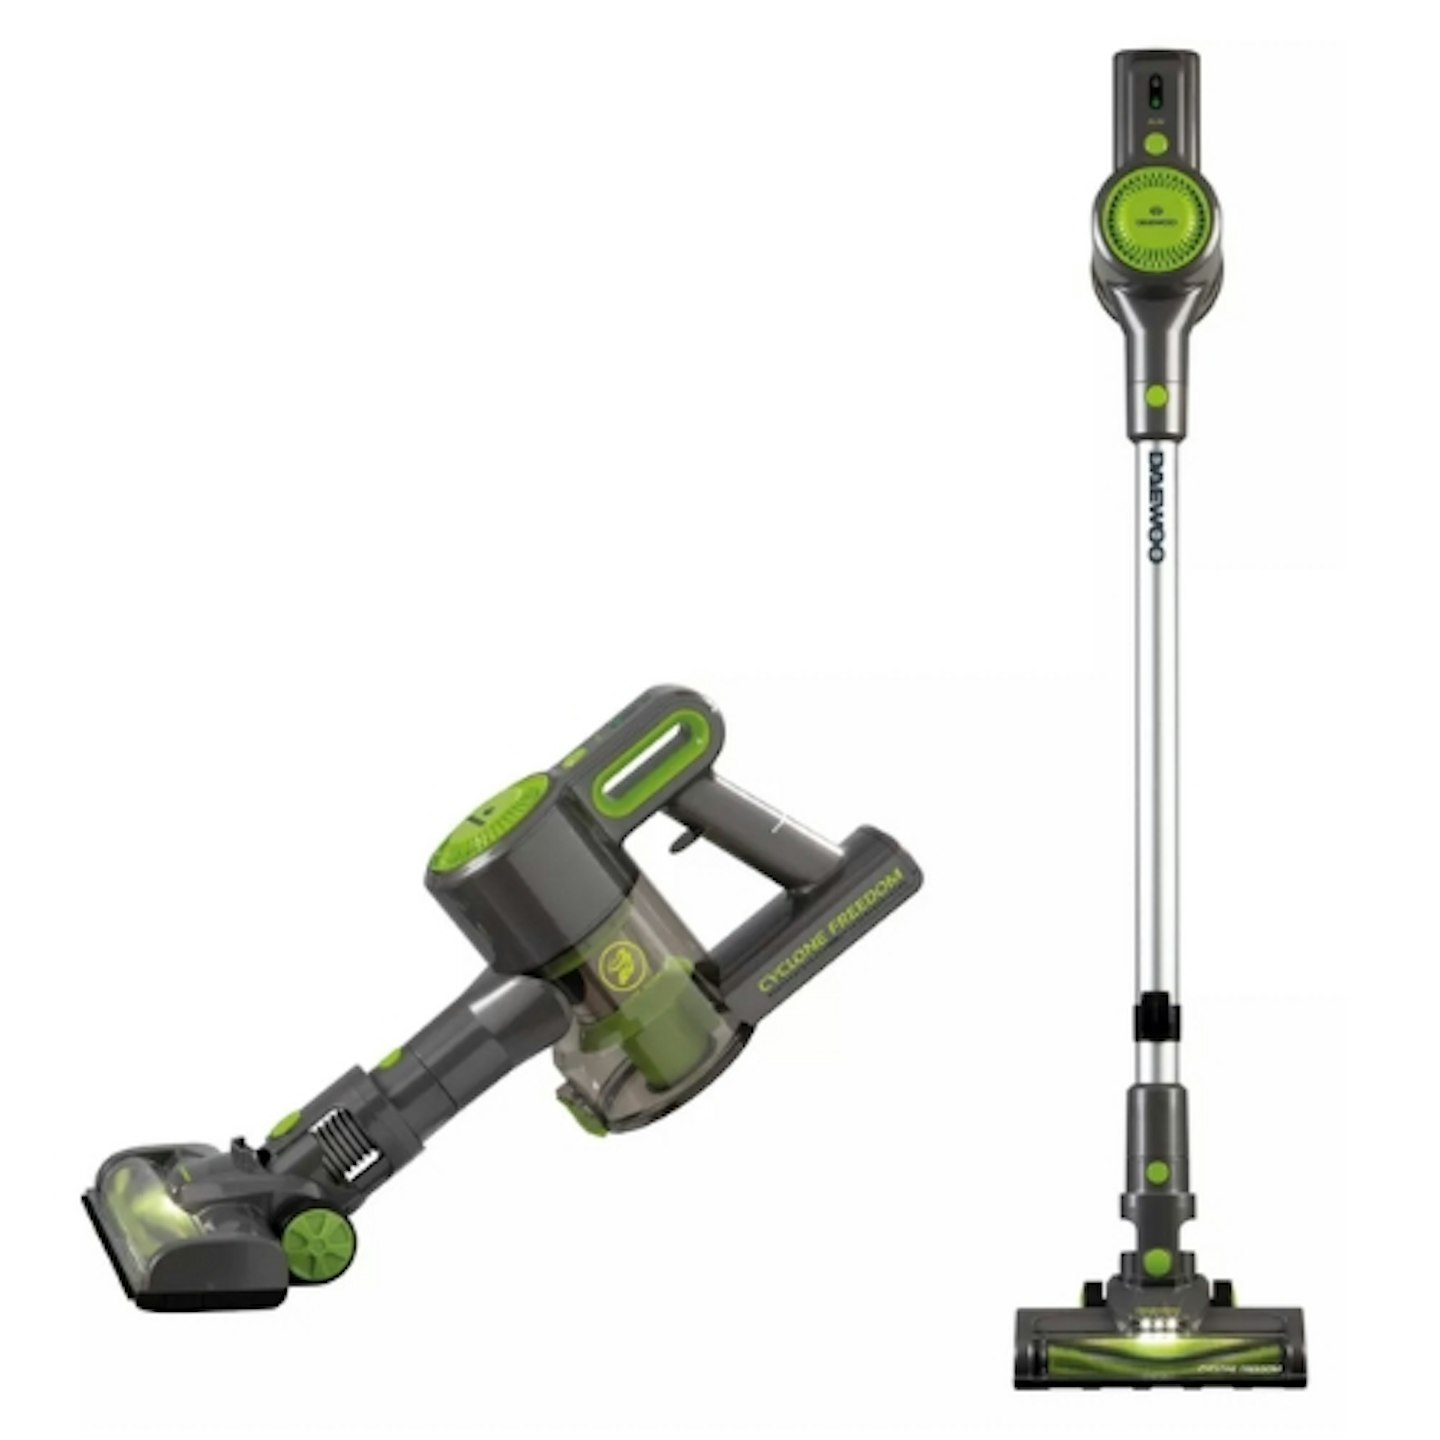 DAEWOO Cordless Stick Vacuum Handheld Rechargeable Cyclone Bagless Silver Green